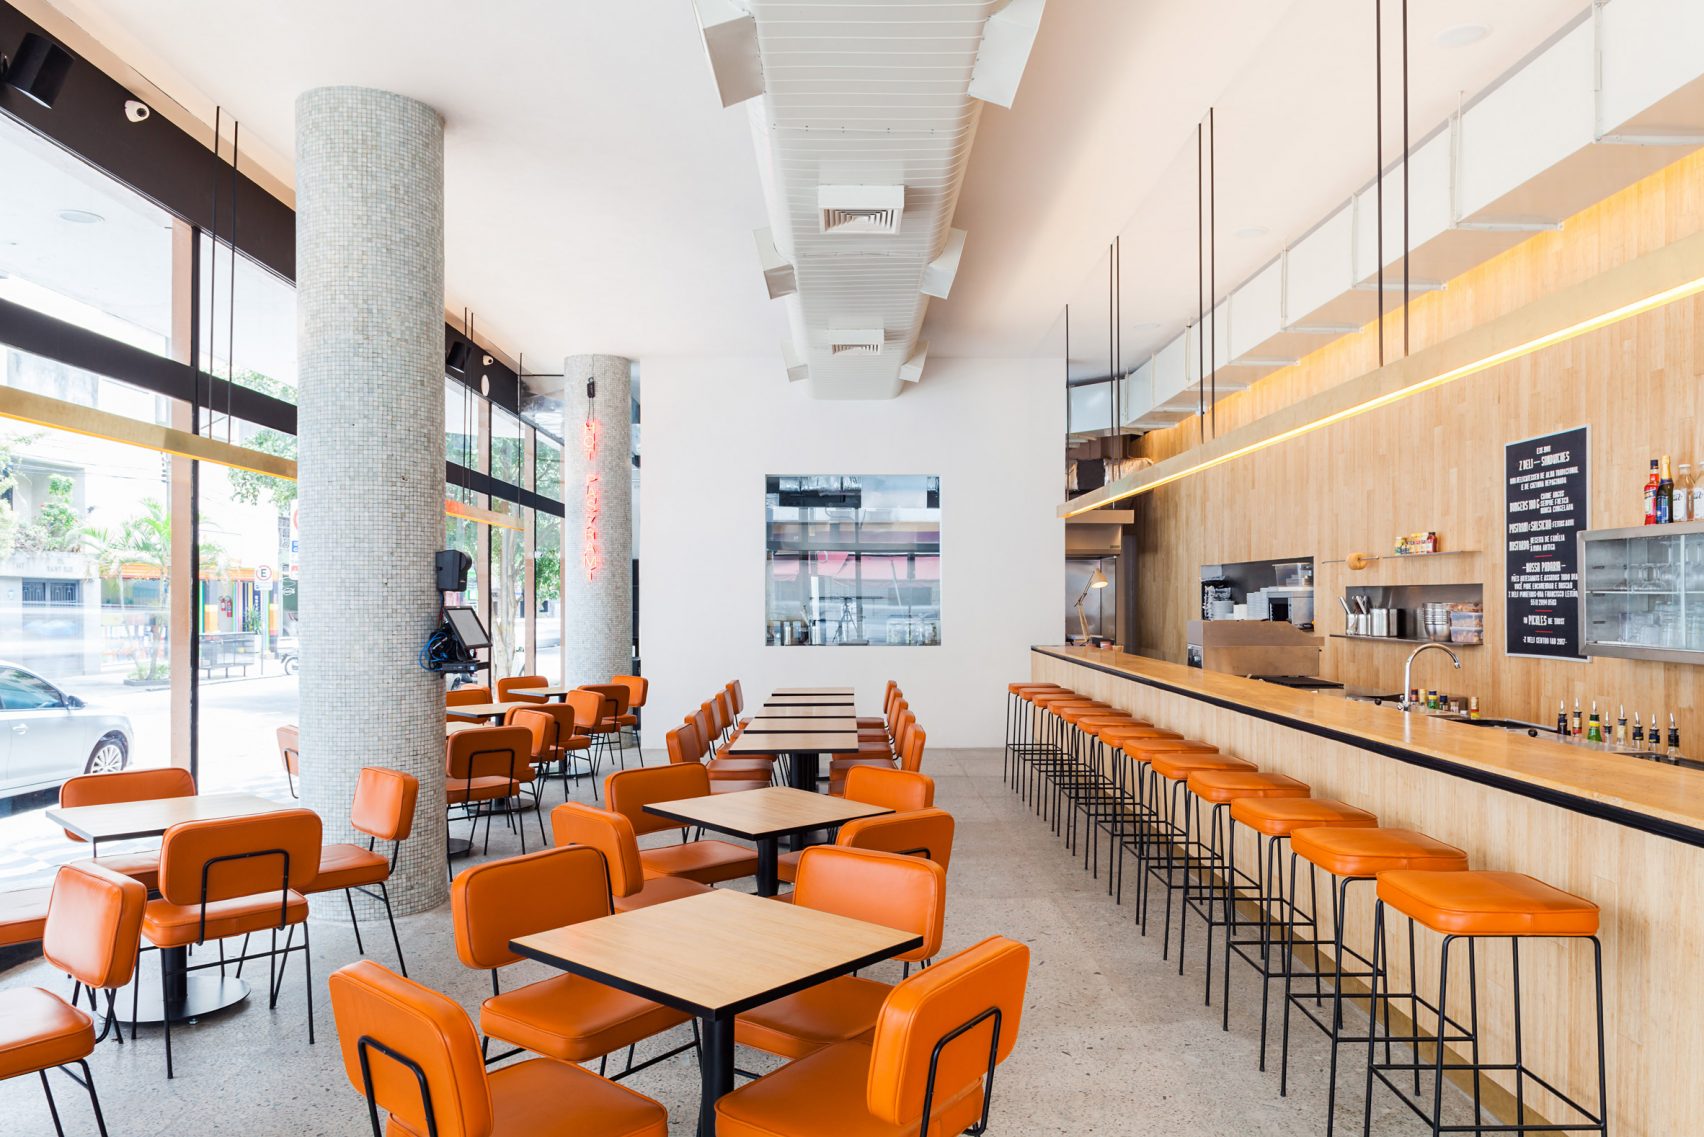 A 50s Diner Influenced this Mid-Century Deli in São Paulo_1